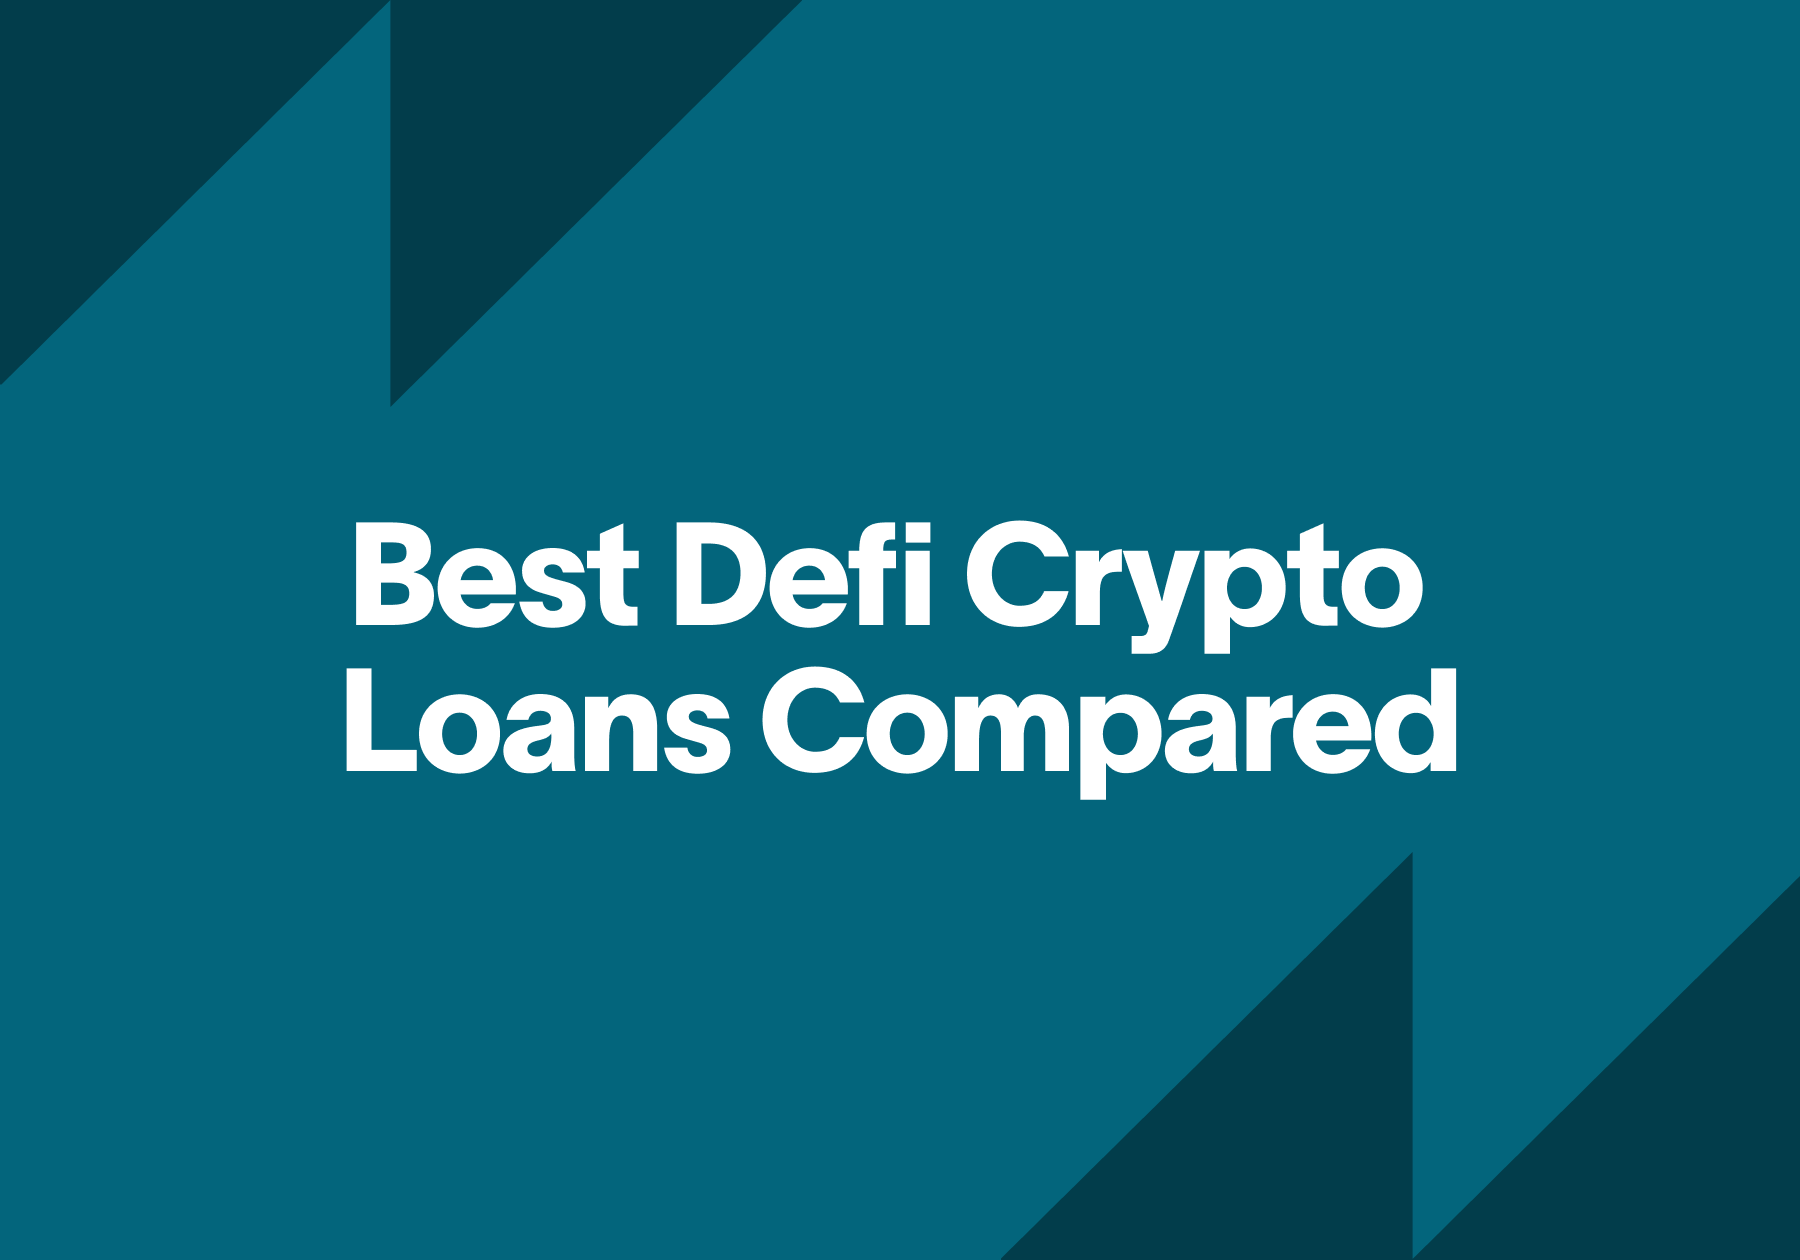 Best Defi Crypto Loans Compared